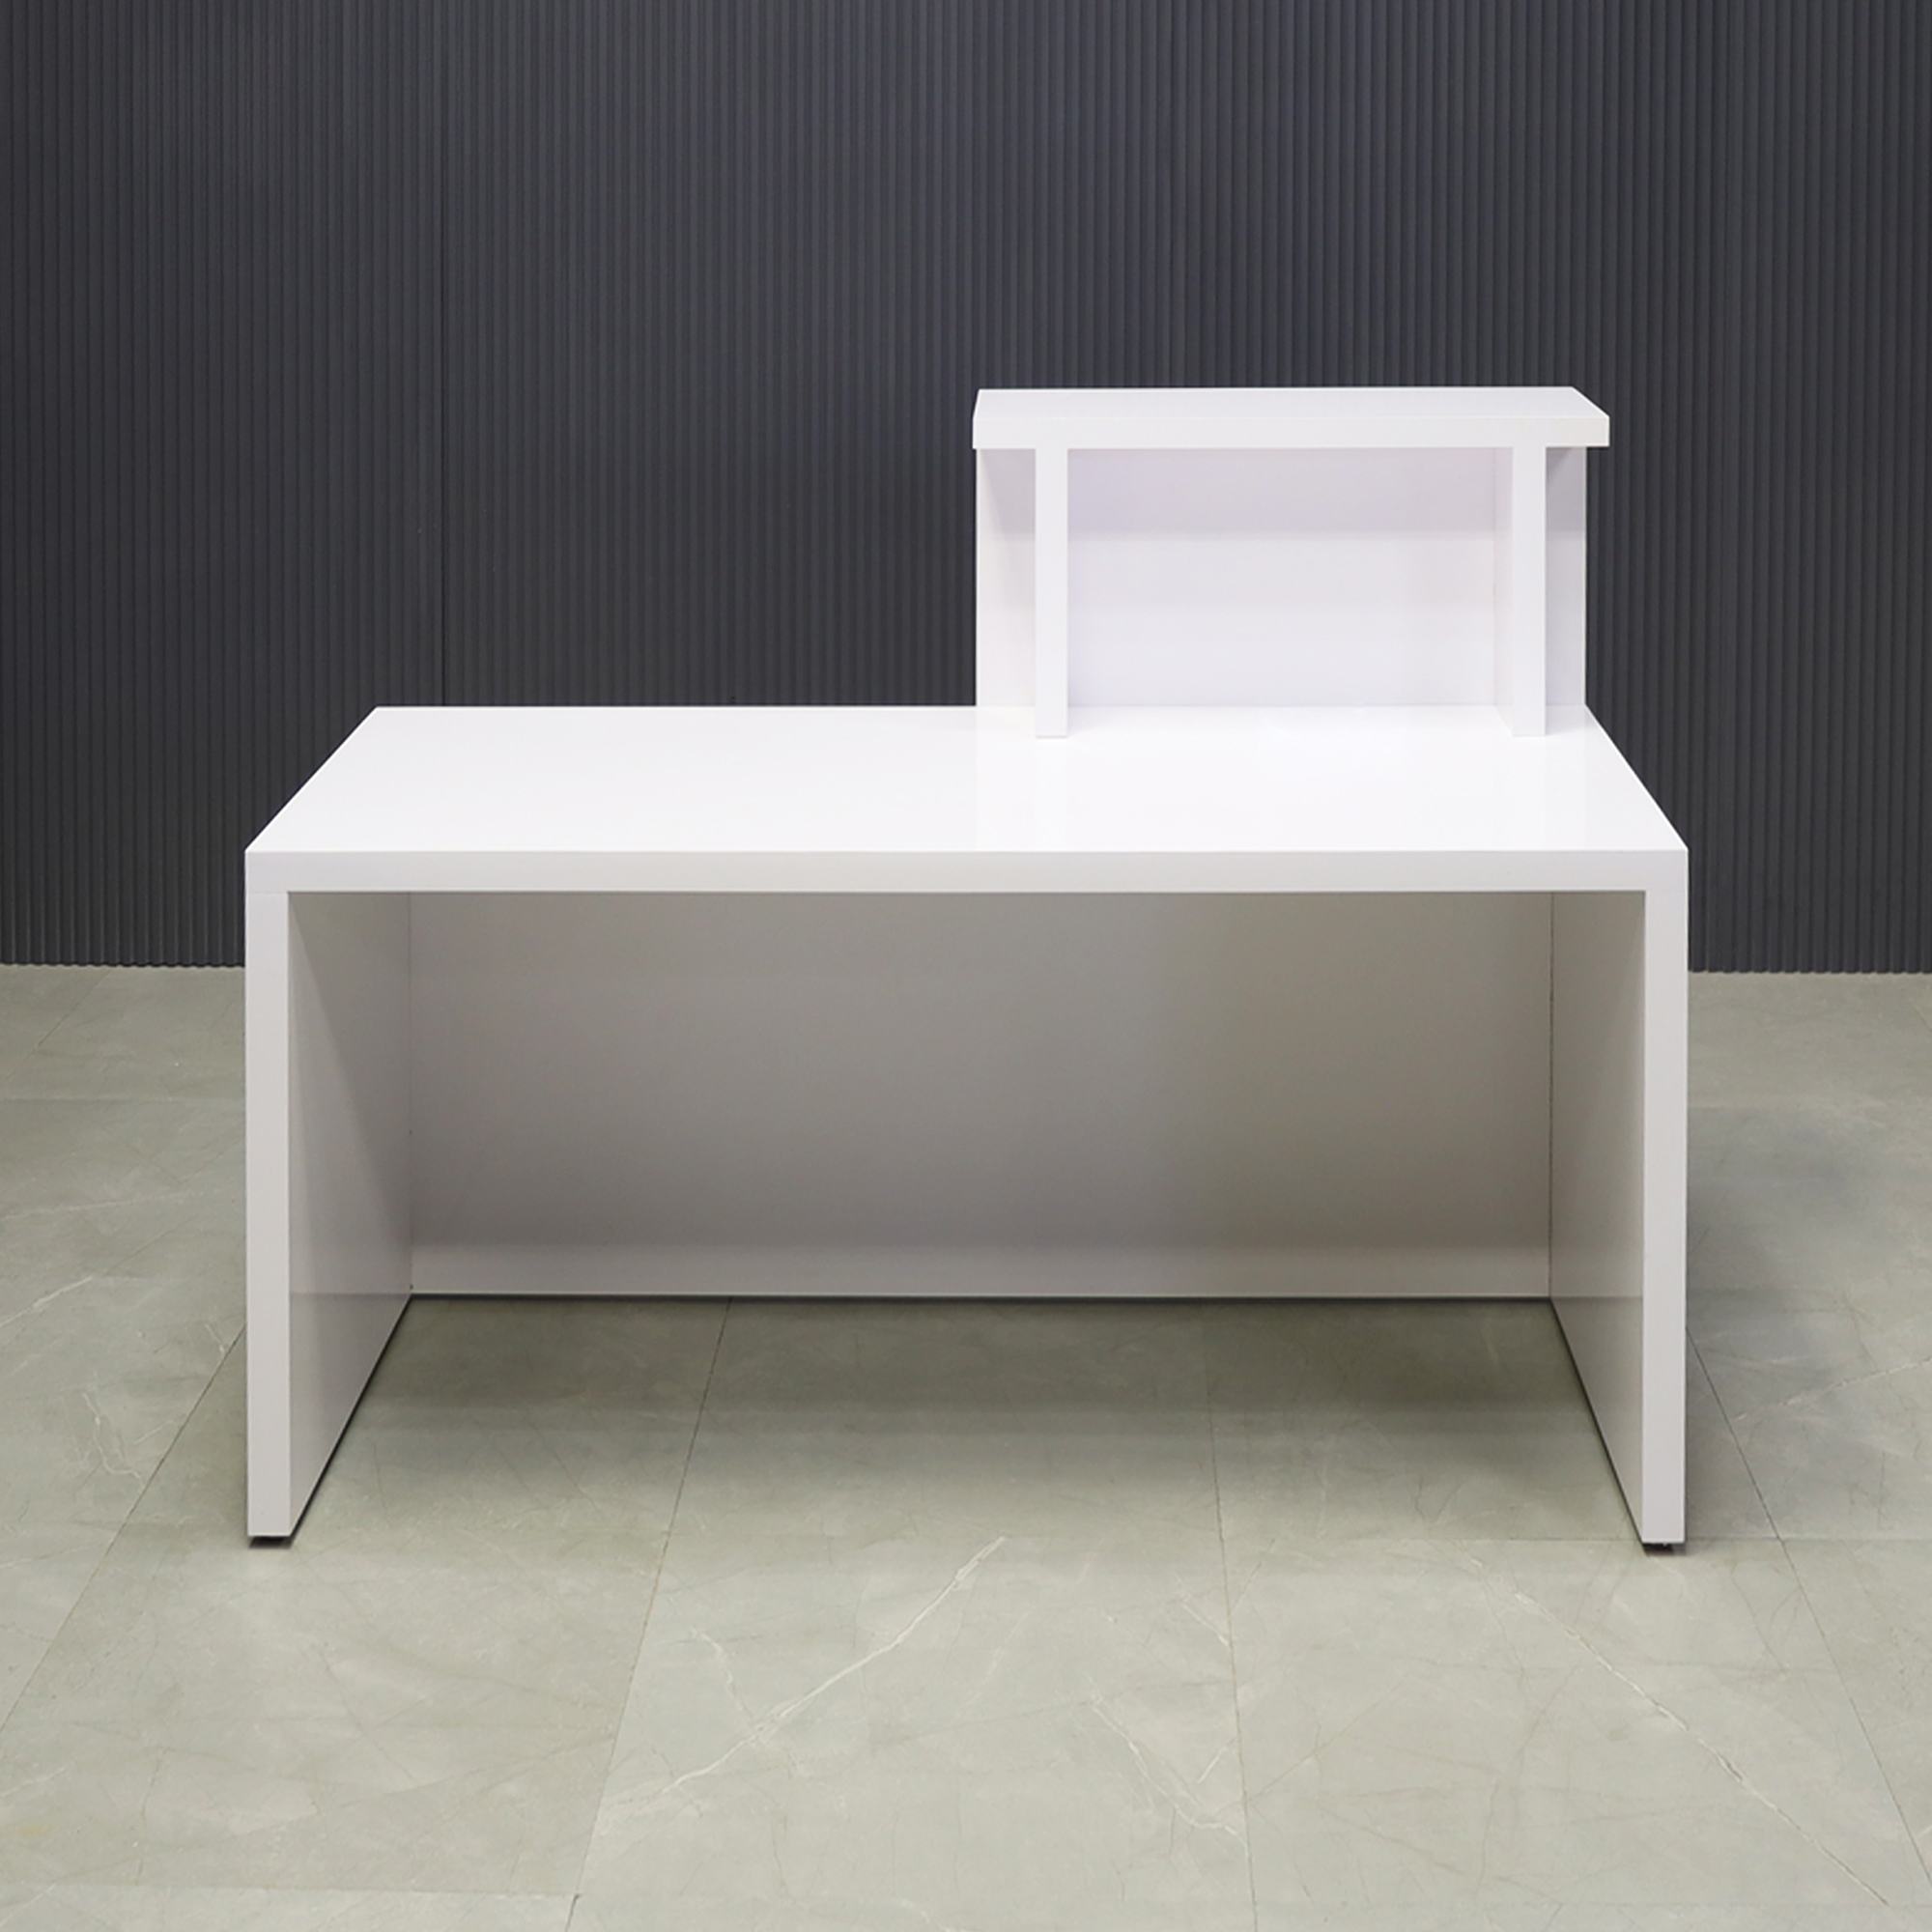 72-inch Los Angeles Reception Desk, left side counter when facing front, in white gloss laminate counter and desk, shown here.